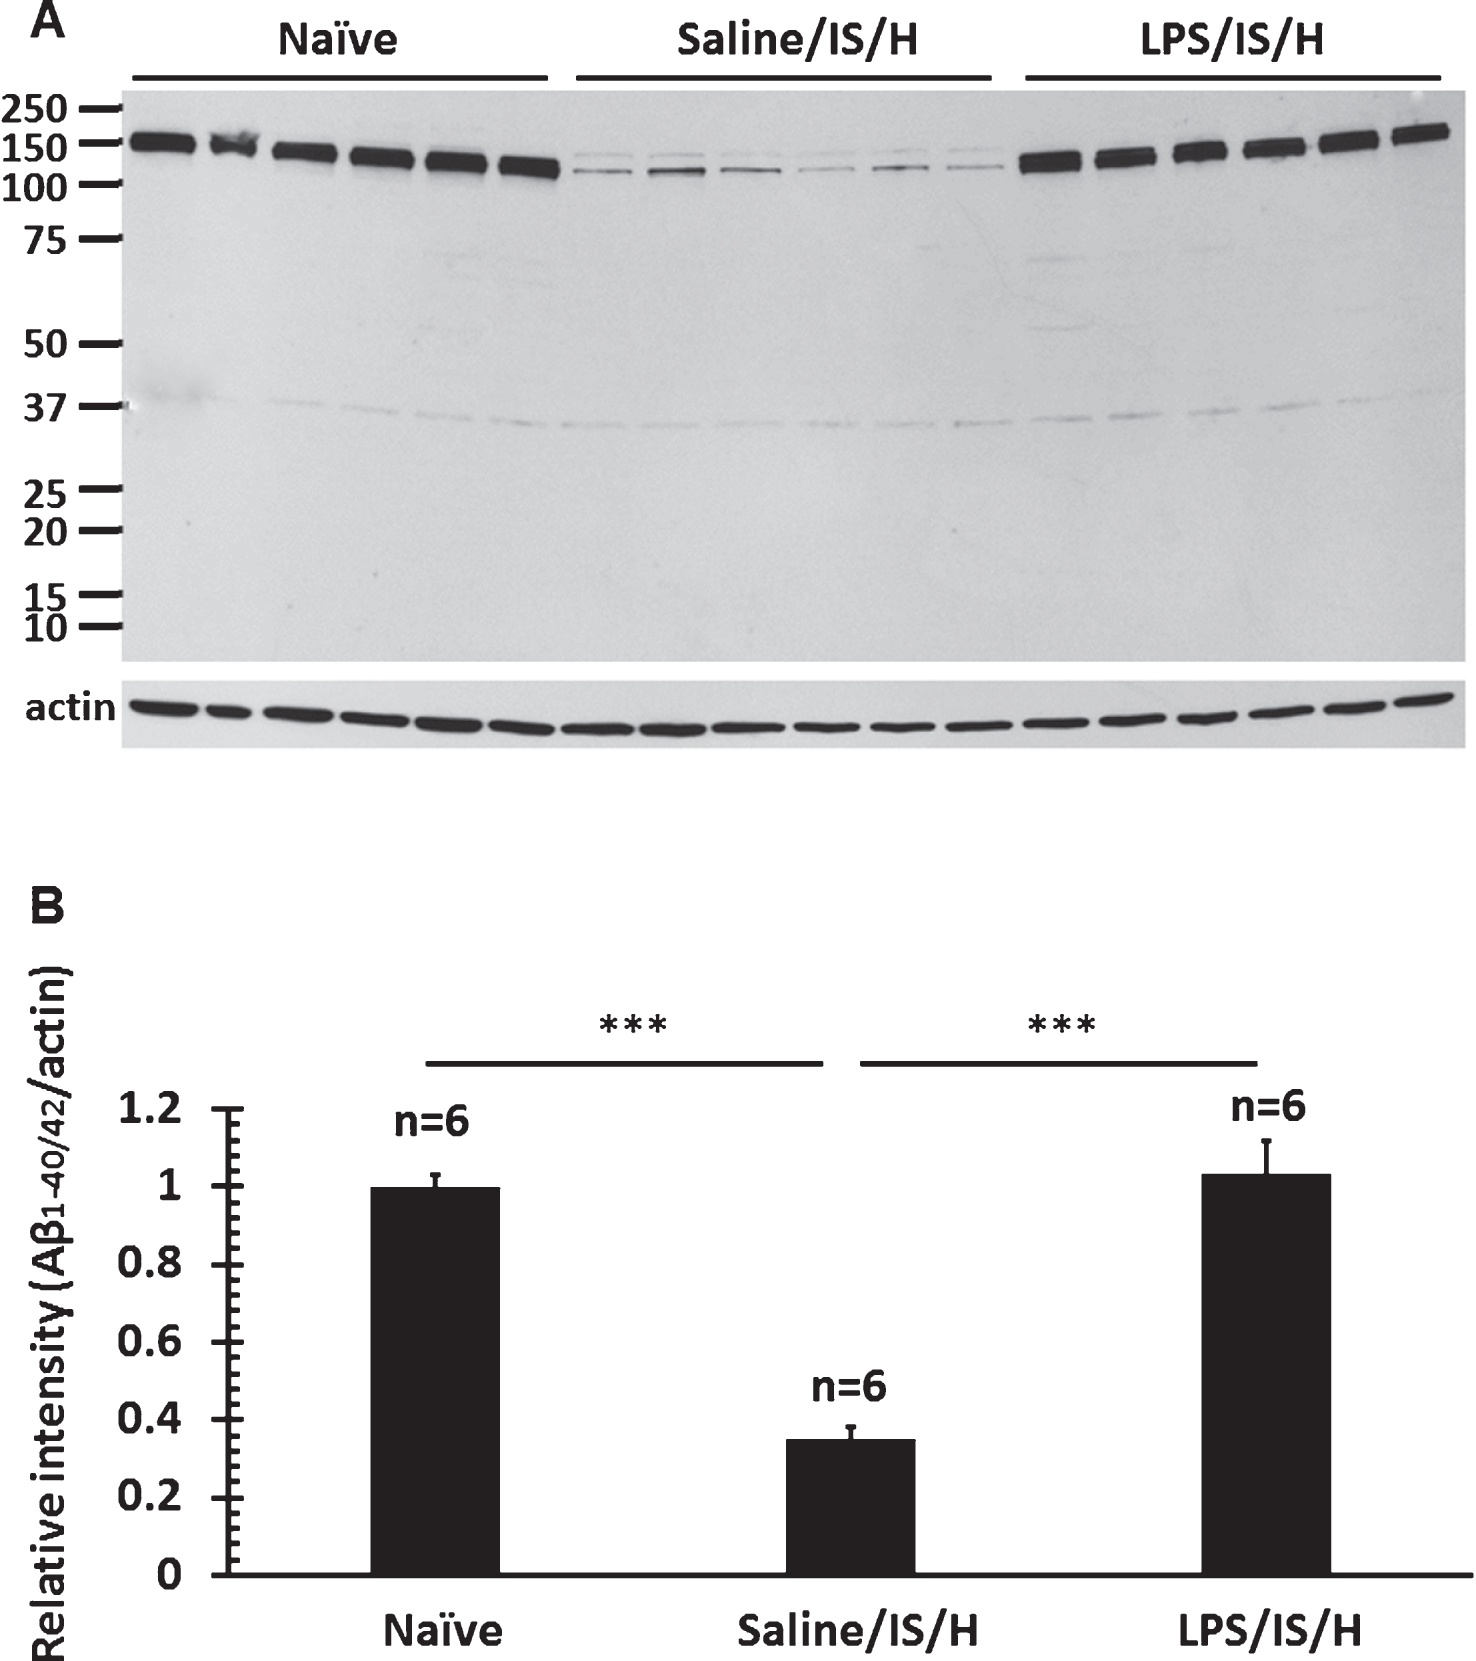 Western blot analysis for Aβ1 - 40/42 in the hemisphere ipsilateral to ischemia at 12 weeks following LPS/IS/H and saline/IS/H compared to naïve control. A) A protein with molecular weight as 150 kDa was detected on Western blot analysis for Aβ1 - 40/42 either following saline/IS/H or following LPS/IS/H and in naïve control. B) The expression of Aβ1 - 40/42 decreased following saline/IS/H compared to naïve, and Aβ1 - 40/42 increased following LPS/IS/H compared to saline/IS/H. The expression of Aβ1 - 40/42 following LPS/IS/H was not significantly different from naïve controls. β-actin was used as the loading control.  ***p <  0.001.